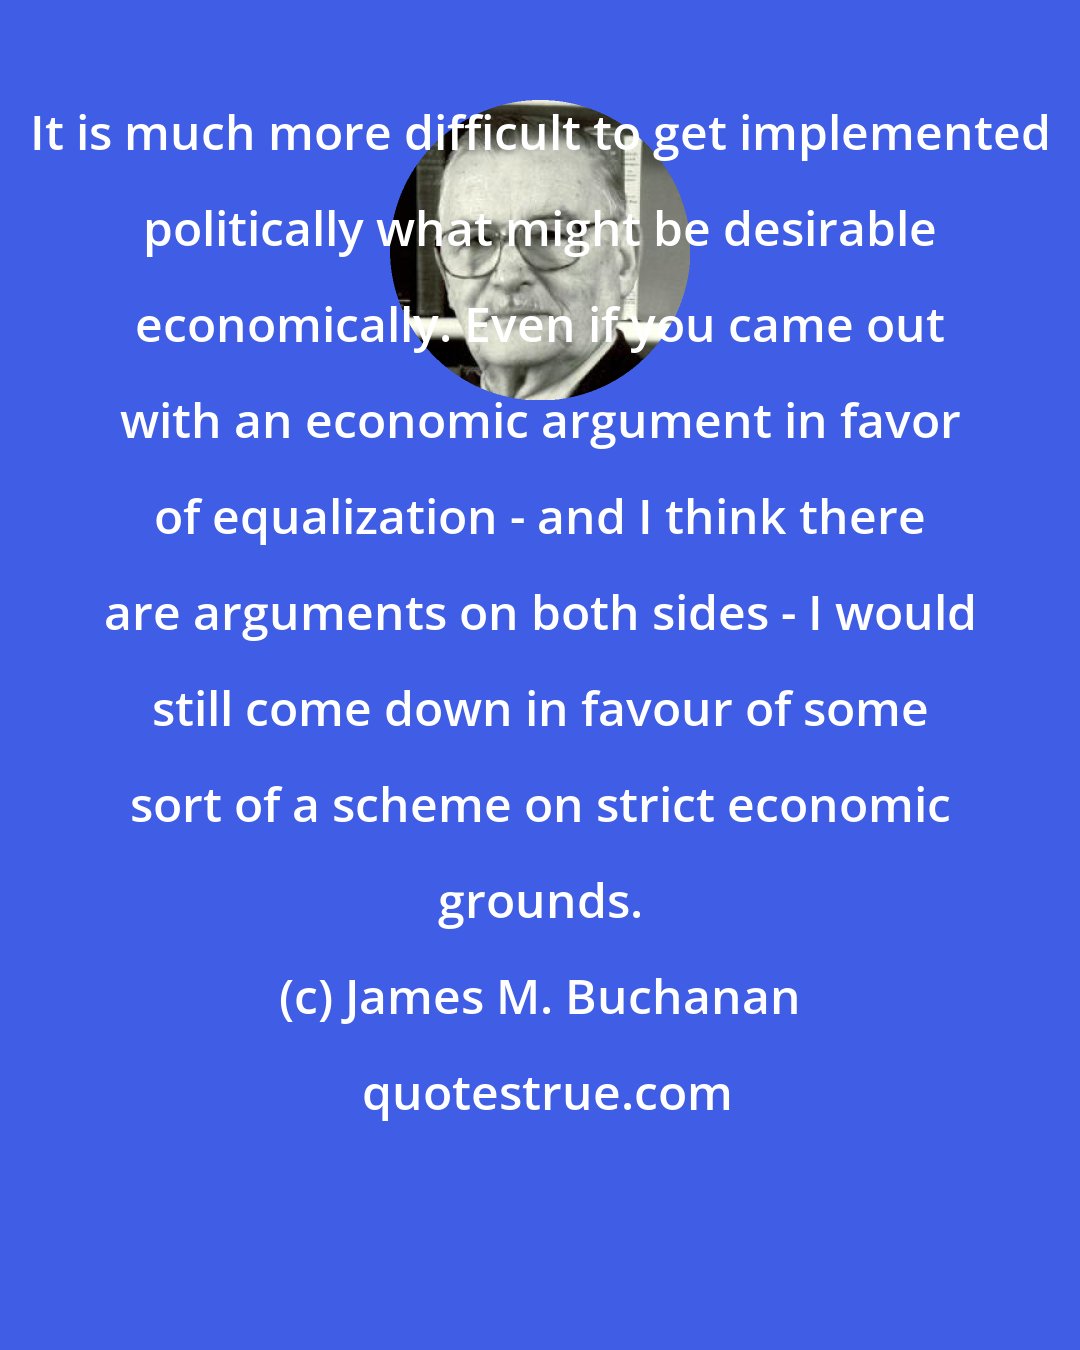 James M. Buchanan: It is much more difficult to get implemented politically what might be desirable economically. Even if you came out with an economic argument in favor of equalization - and I think there are arguments on both sides - I would still come down in favour of some sort of a scheme on strict economic grounds.